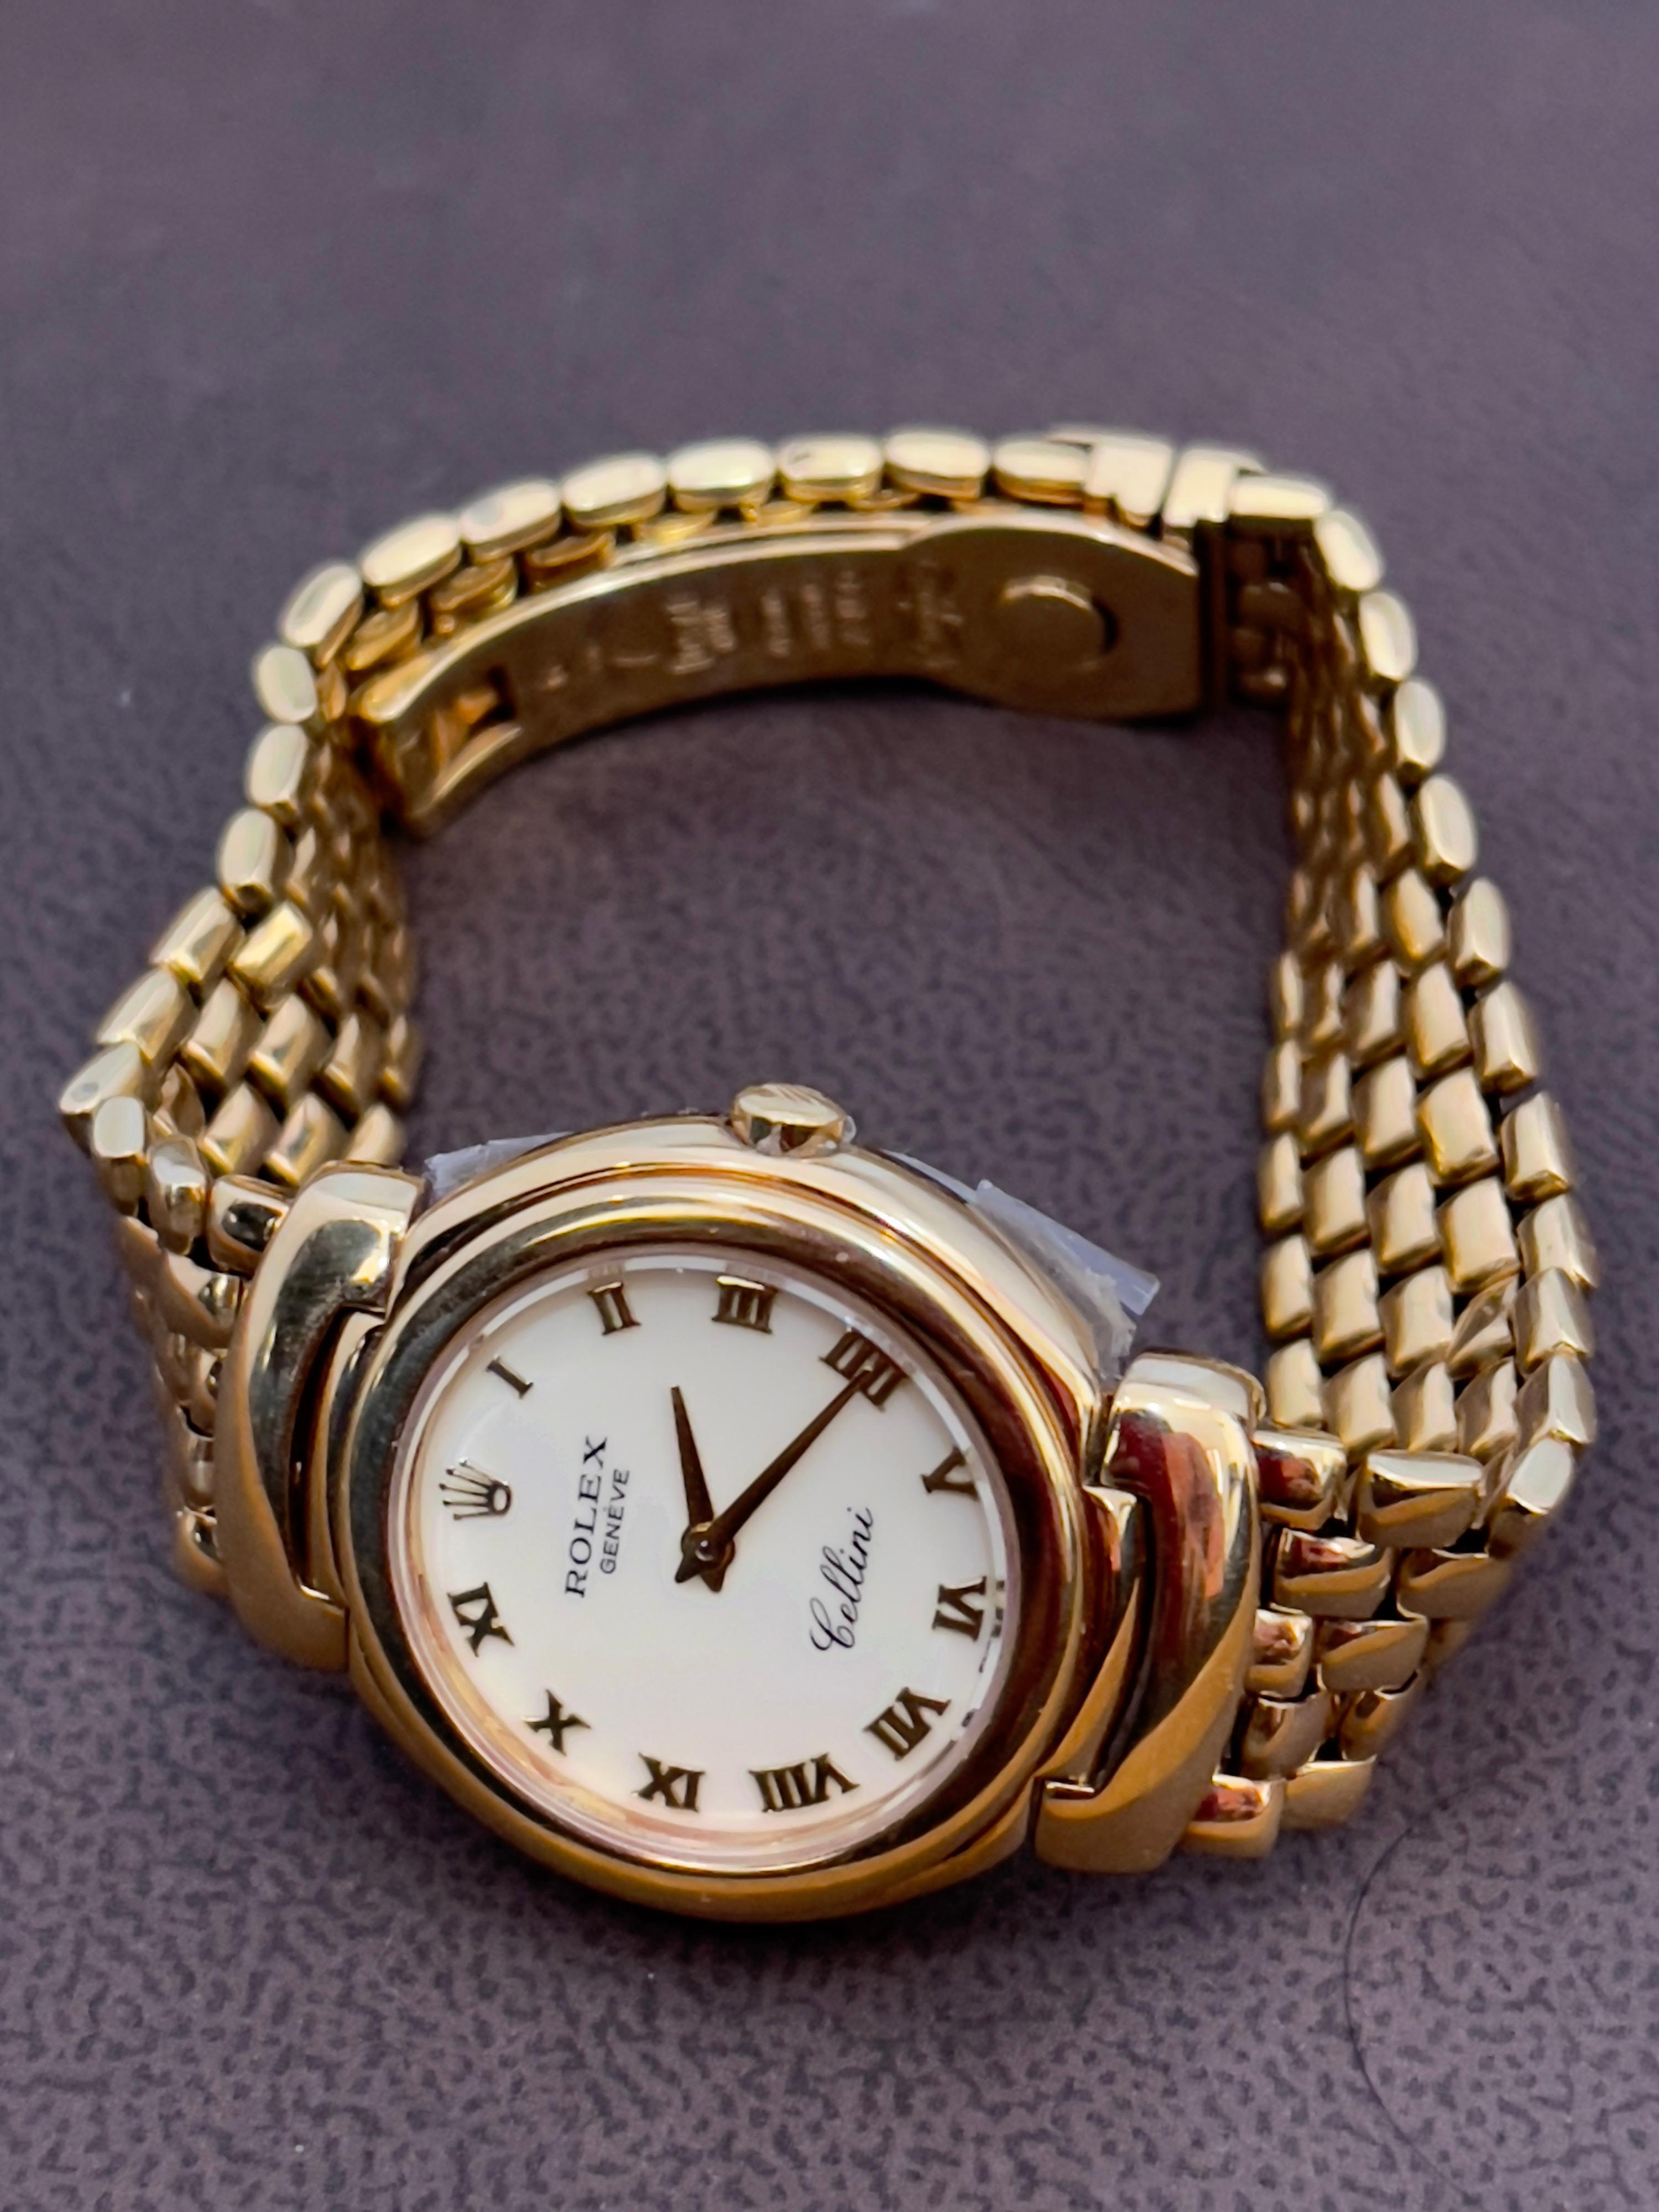 About
A Rolex 'Cellini' 18K Gold Mother-of-Pearl Watch with a mesh Rolex bracelet. The case measures 26mm in diameter.
Metal: 18K Yellow Gold
Total Weight: 66.5 grams
Details
- Swiss Made
- Polished Solid 18k Yellow Gold 
Features round style case